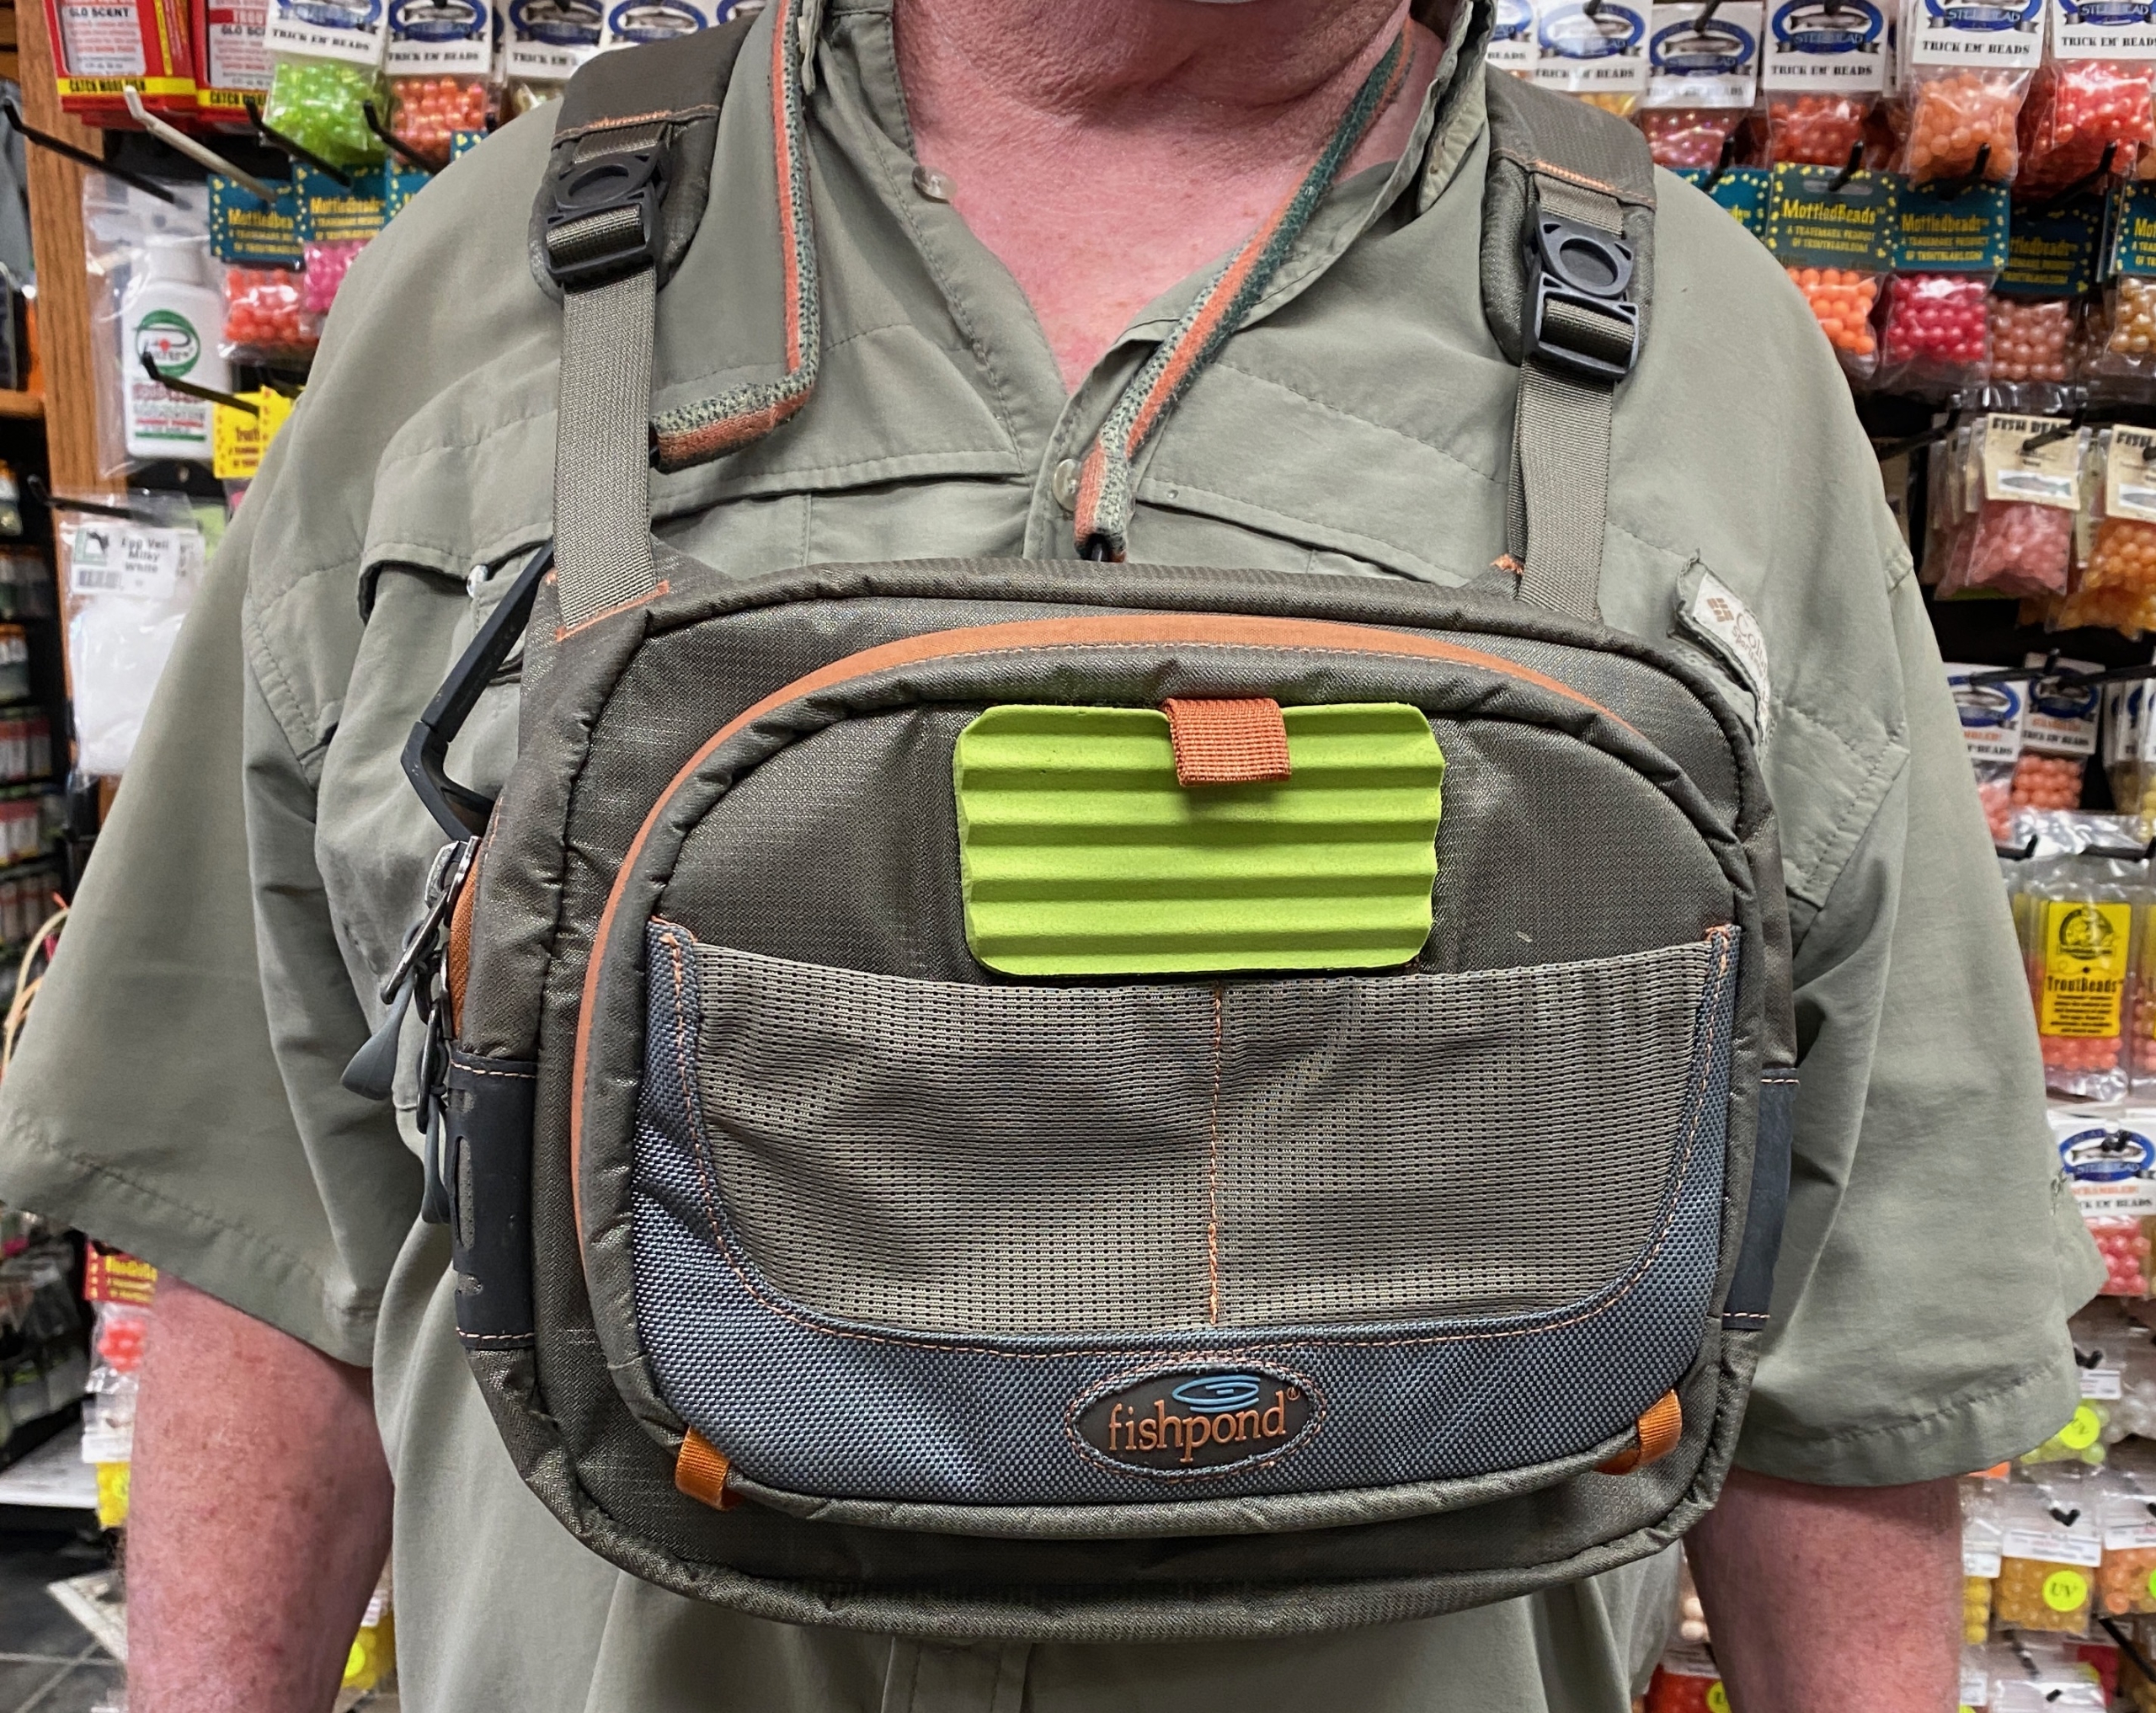 SOLD! – FishPond Cross-Current Chest Pack – LIKE NEW! – $150 – The